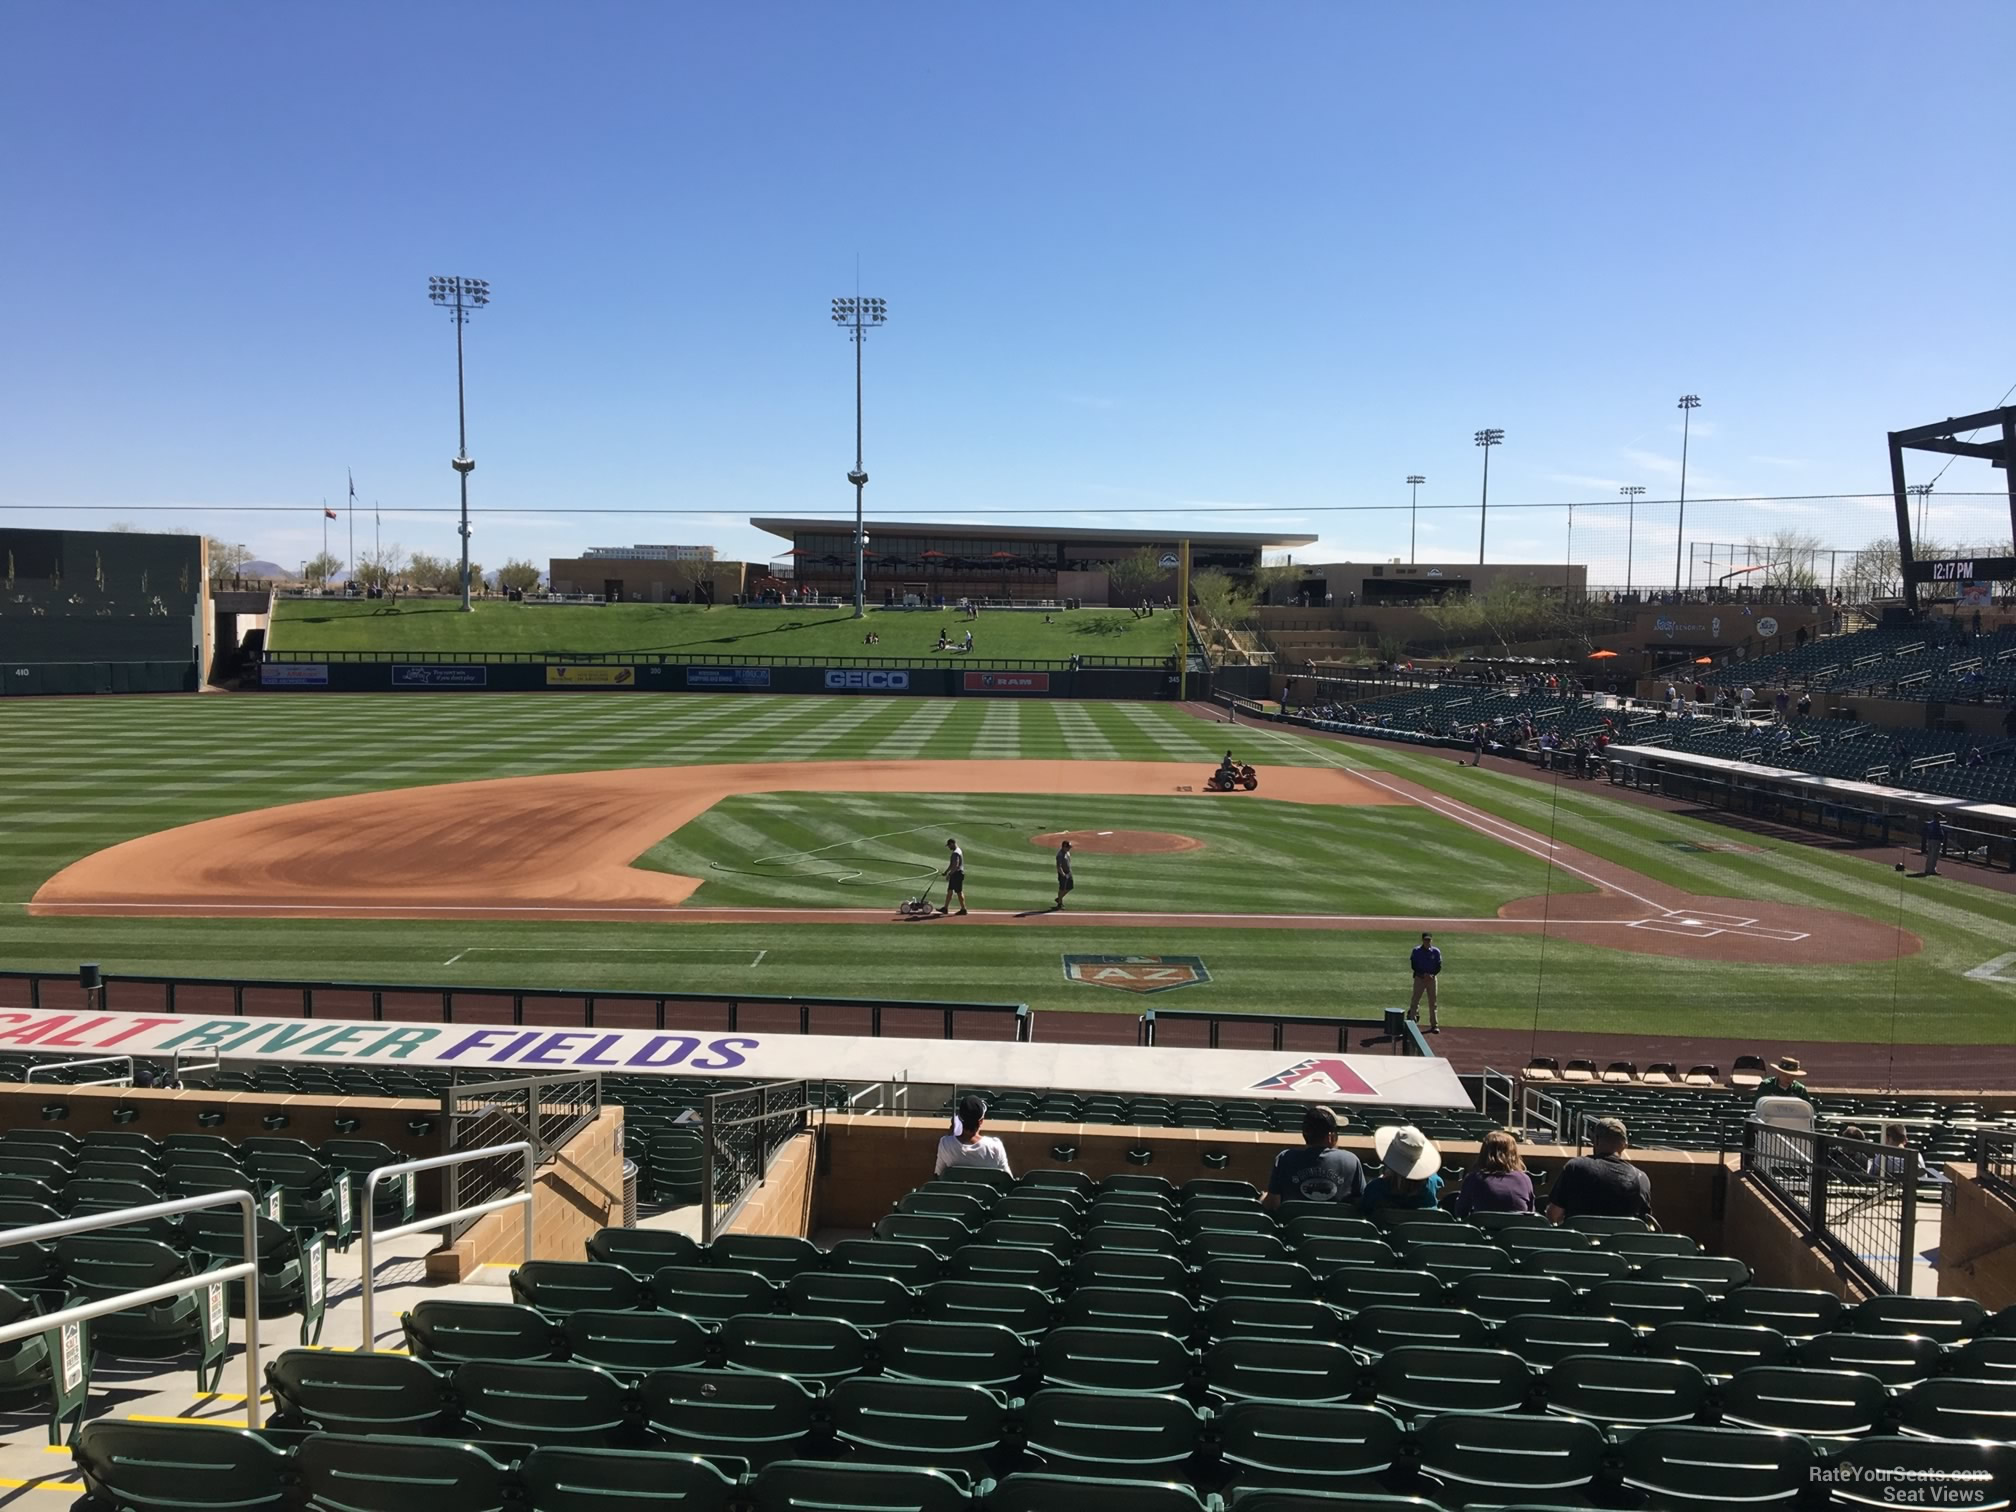 section 216, row 14 seat view  - salt river field at talking stick